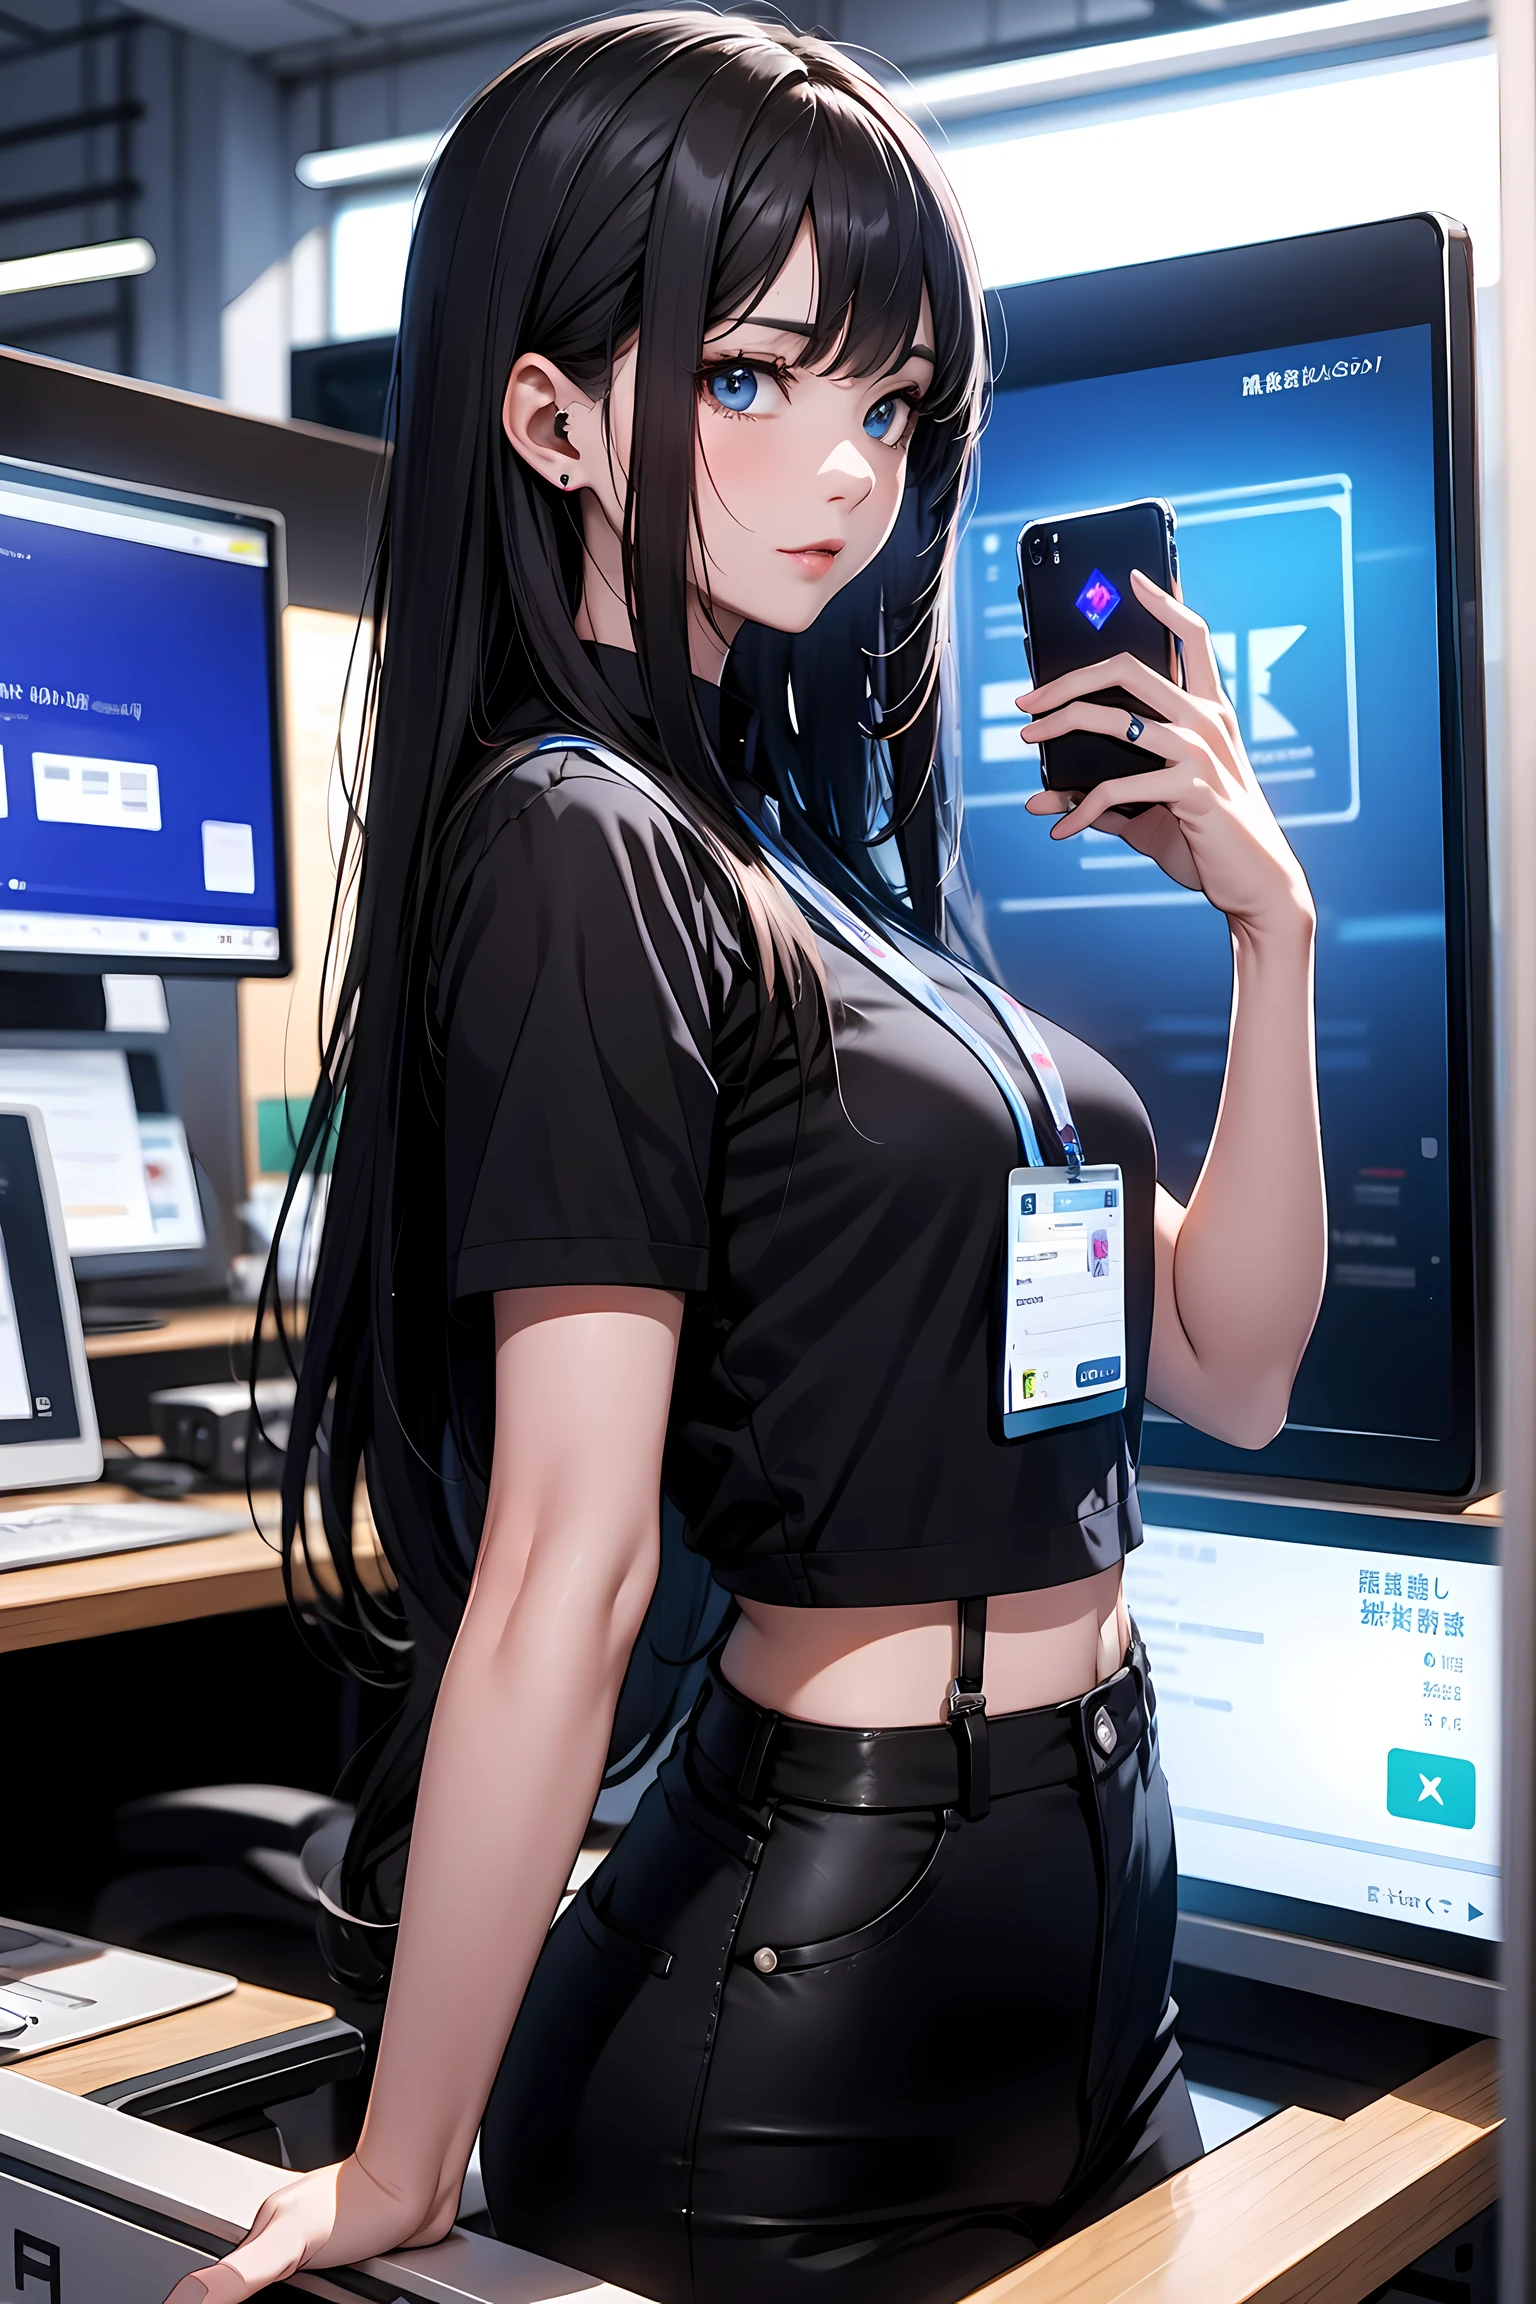 The office district of the near future、Office worker using a smartphone mounted on his arm。Beauty OL,Holograms displayed from a smartphone on your arm、